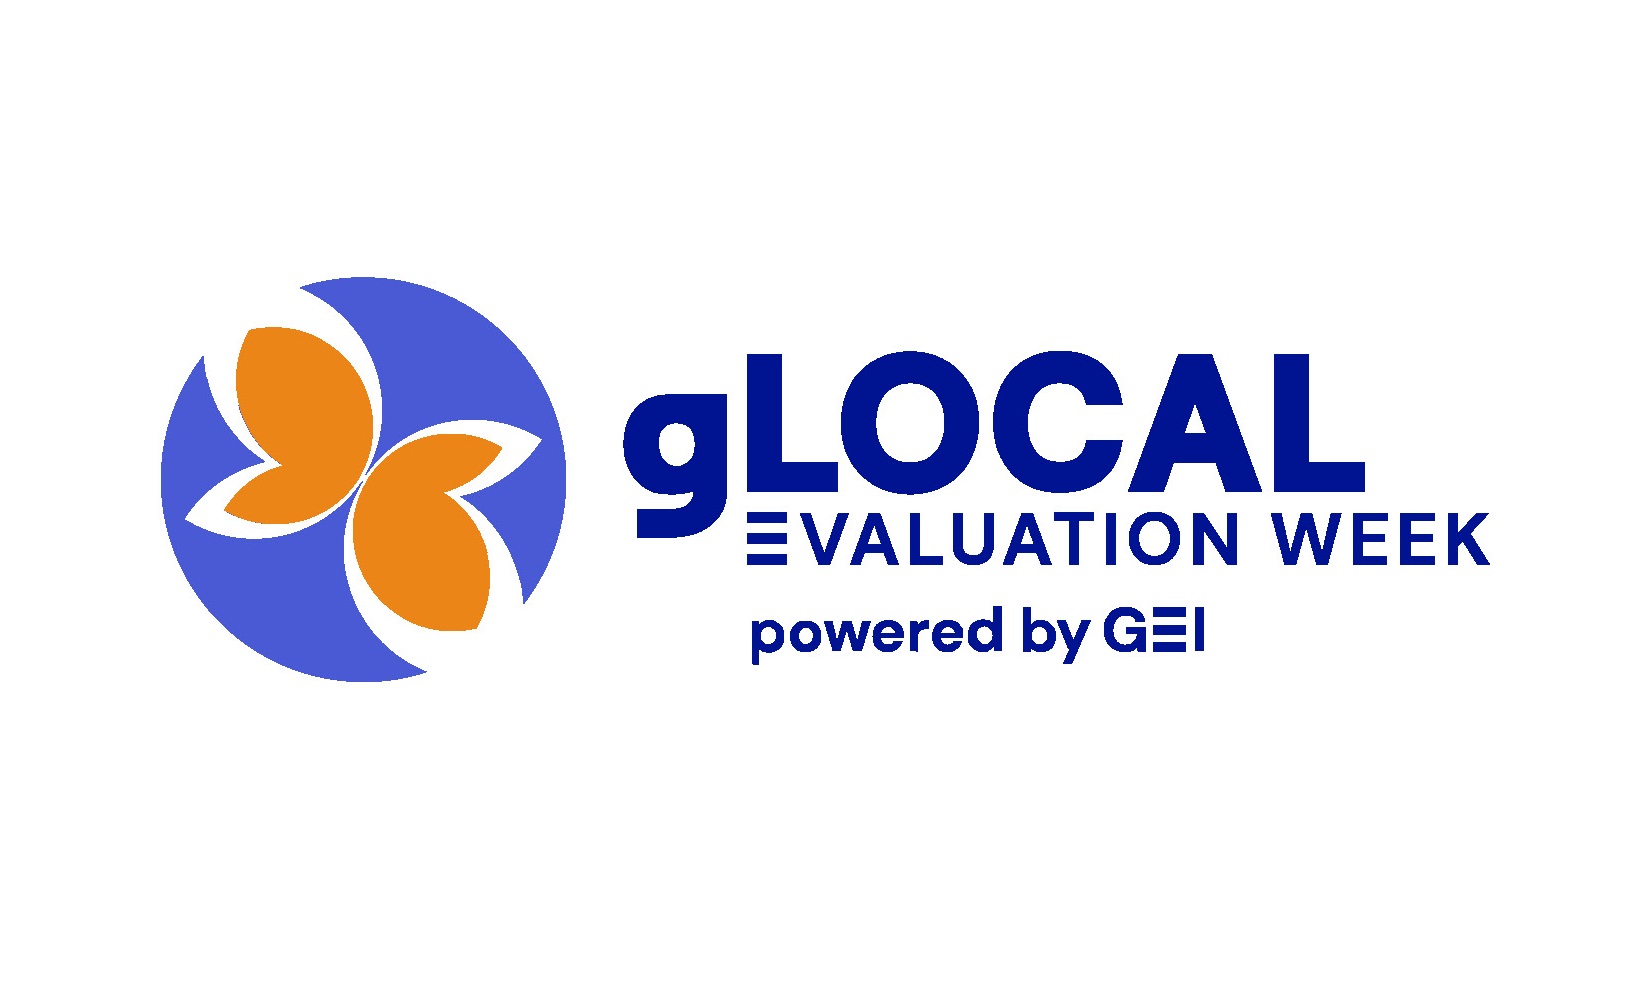 The official Logo of the gLOCAL Evaluation Week 2023